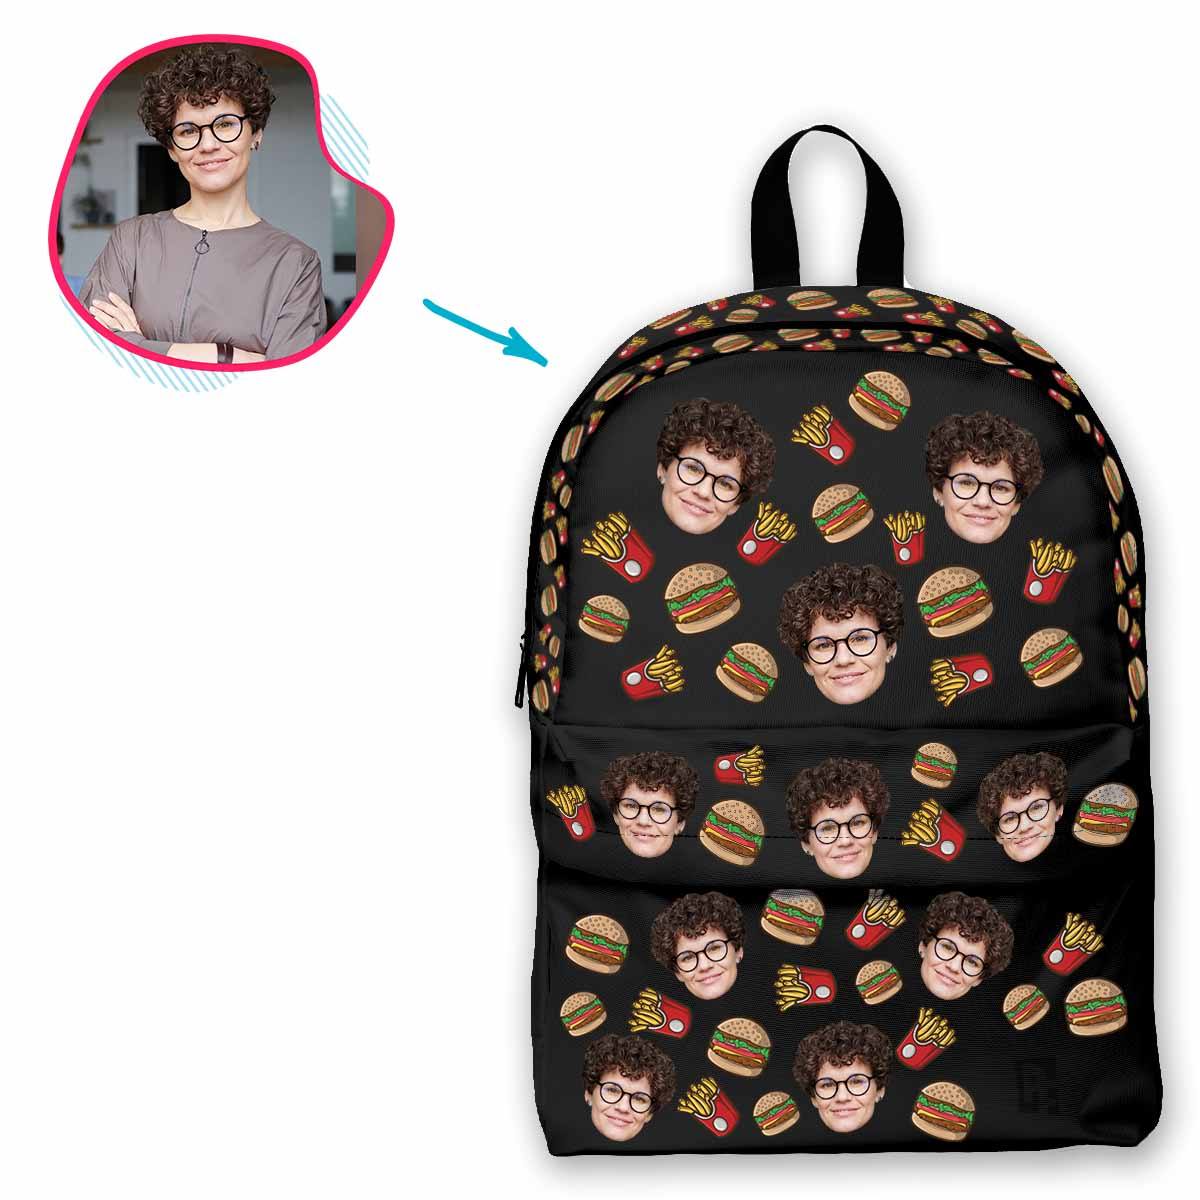 dark Fastfood classic backpack personalized with photo of face printed on it